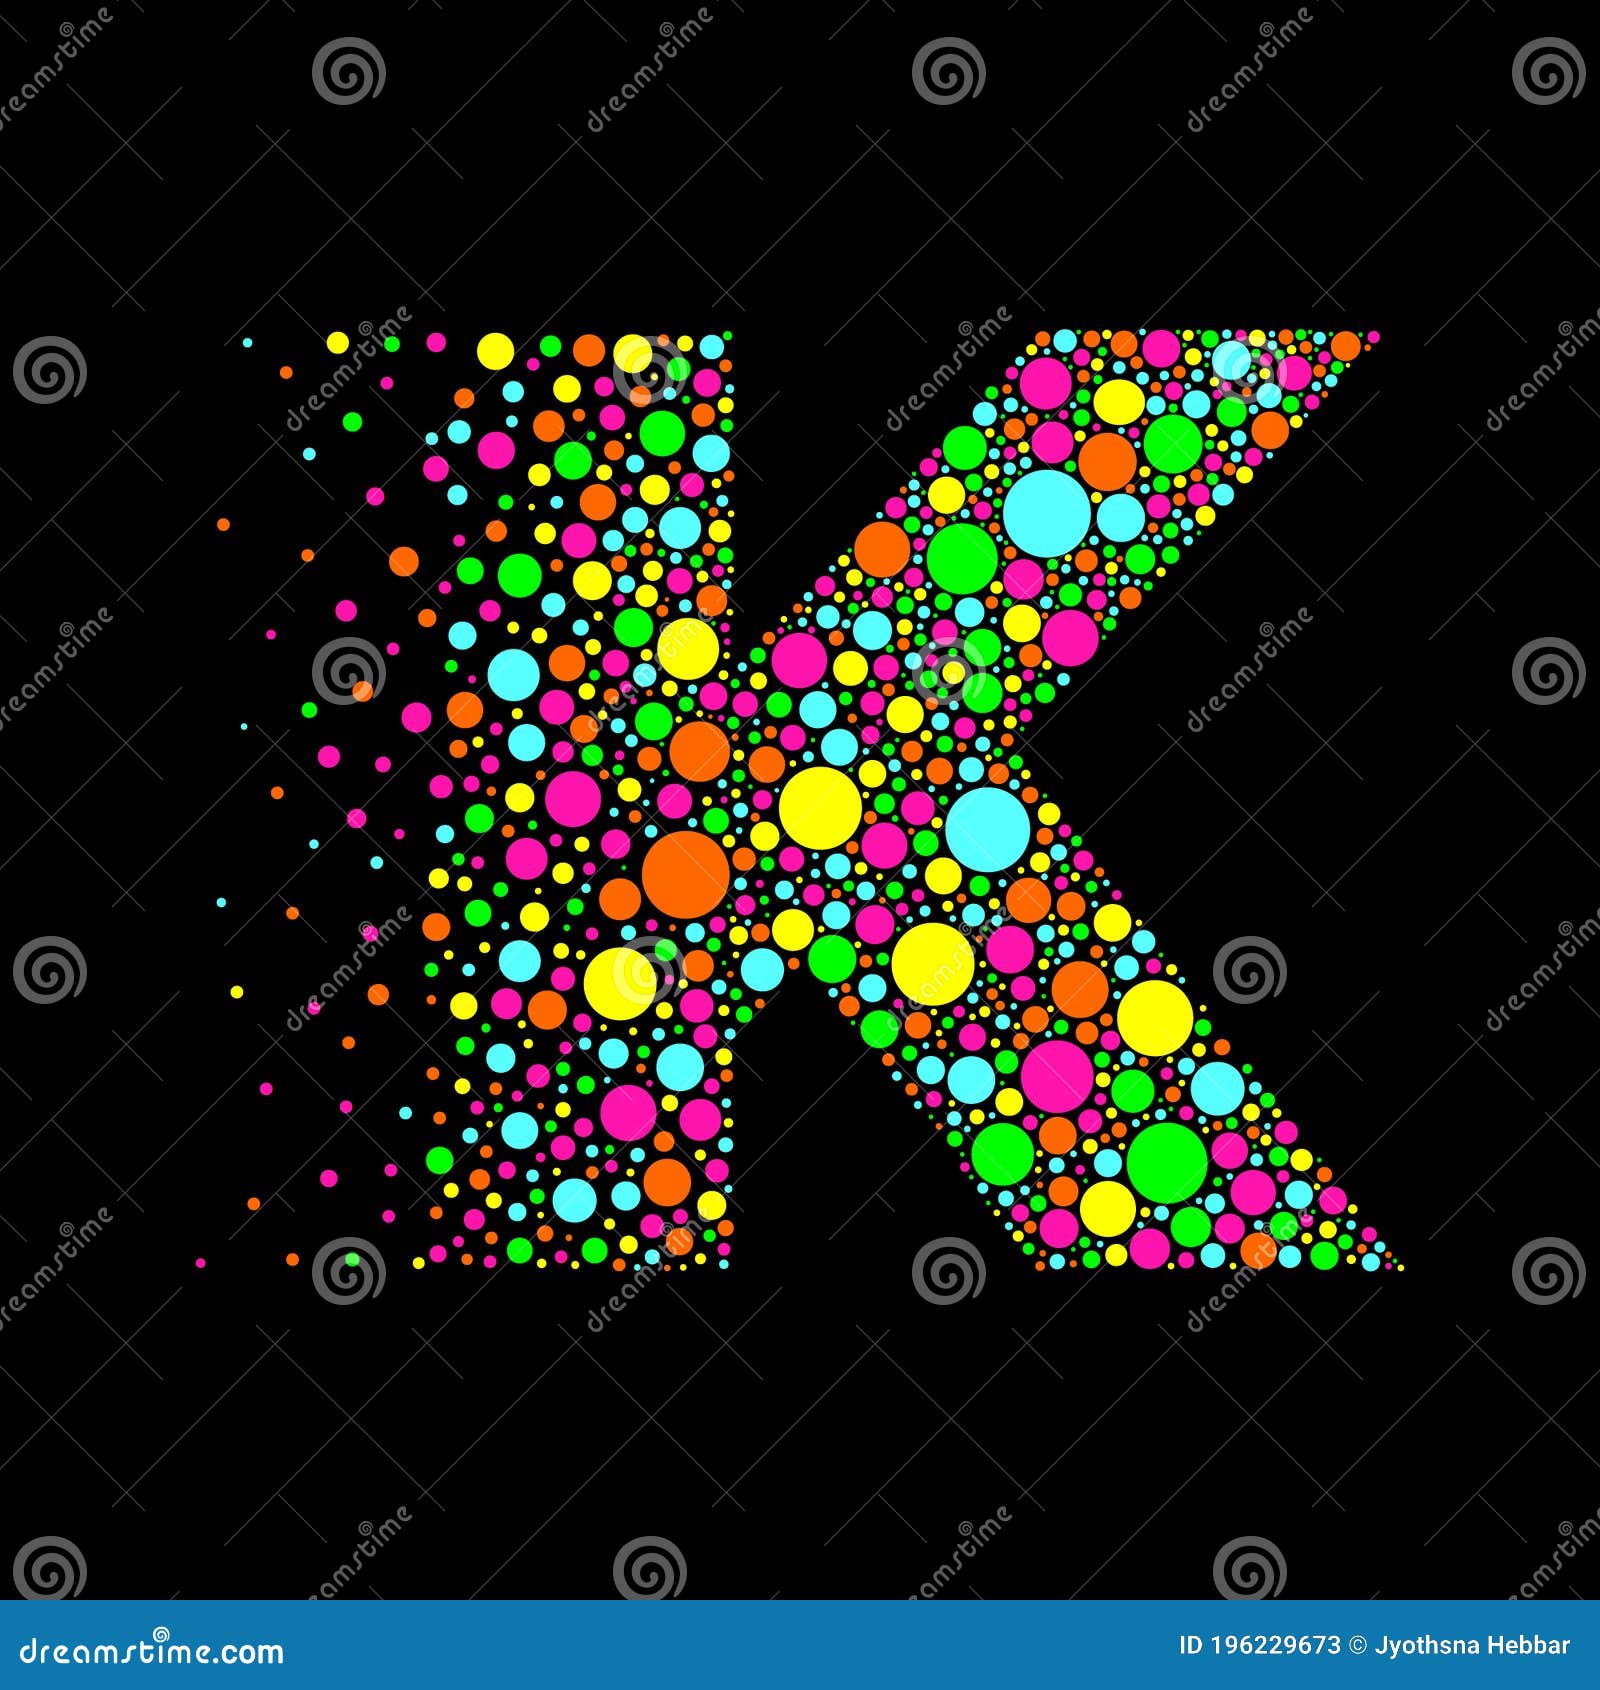 Letter K in Dispersion Effect, Scattering Circles/Bubbles, Colorful ...